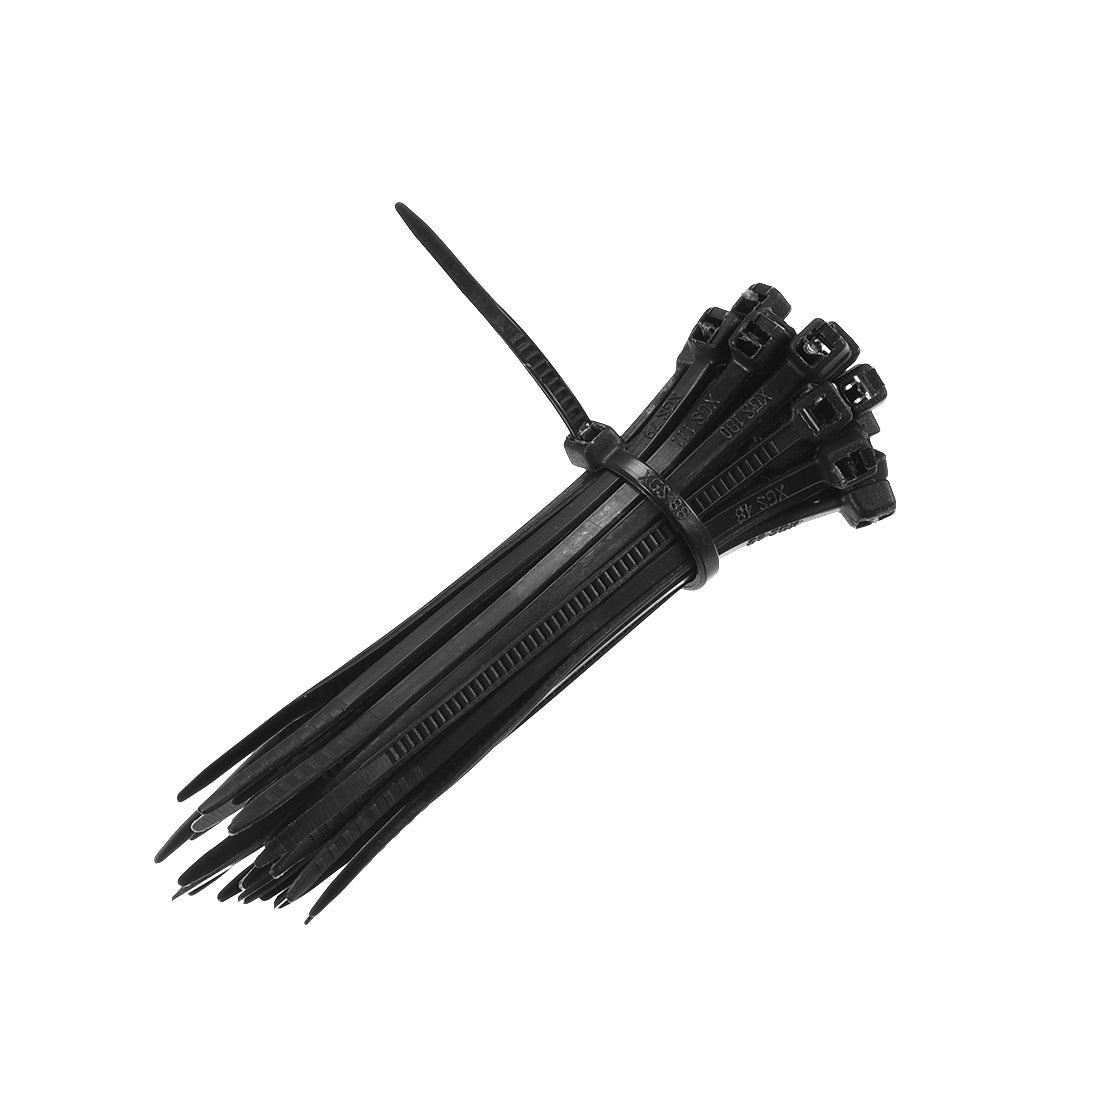 uxcell Uxcell Cable Zip Ties 100mmx1.8mm Self-Locking Nylon Tie Wraps Black 1000pcs